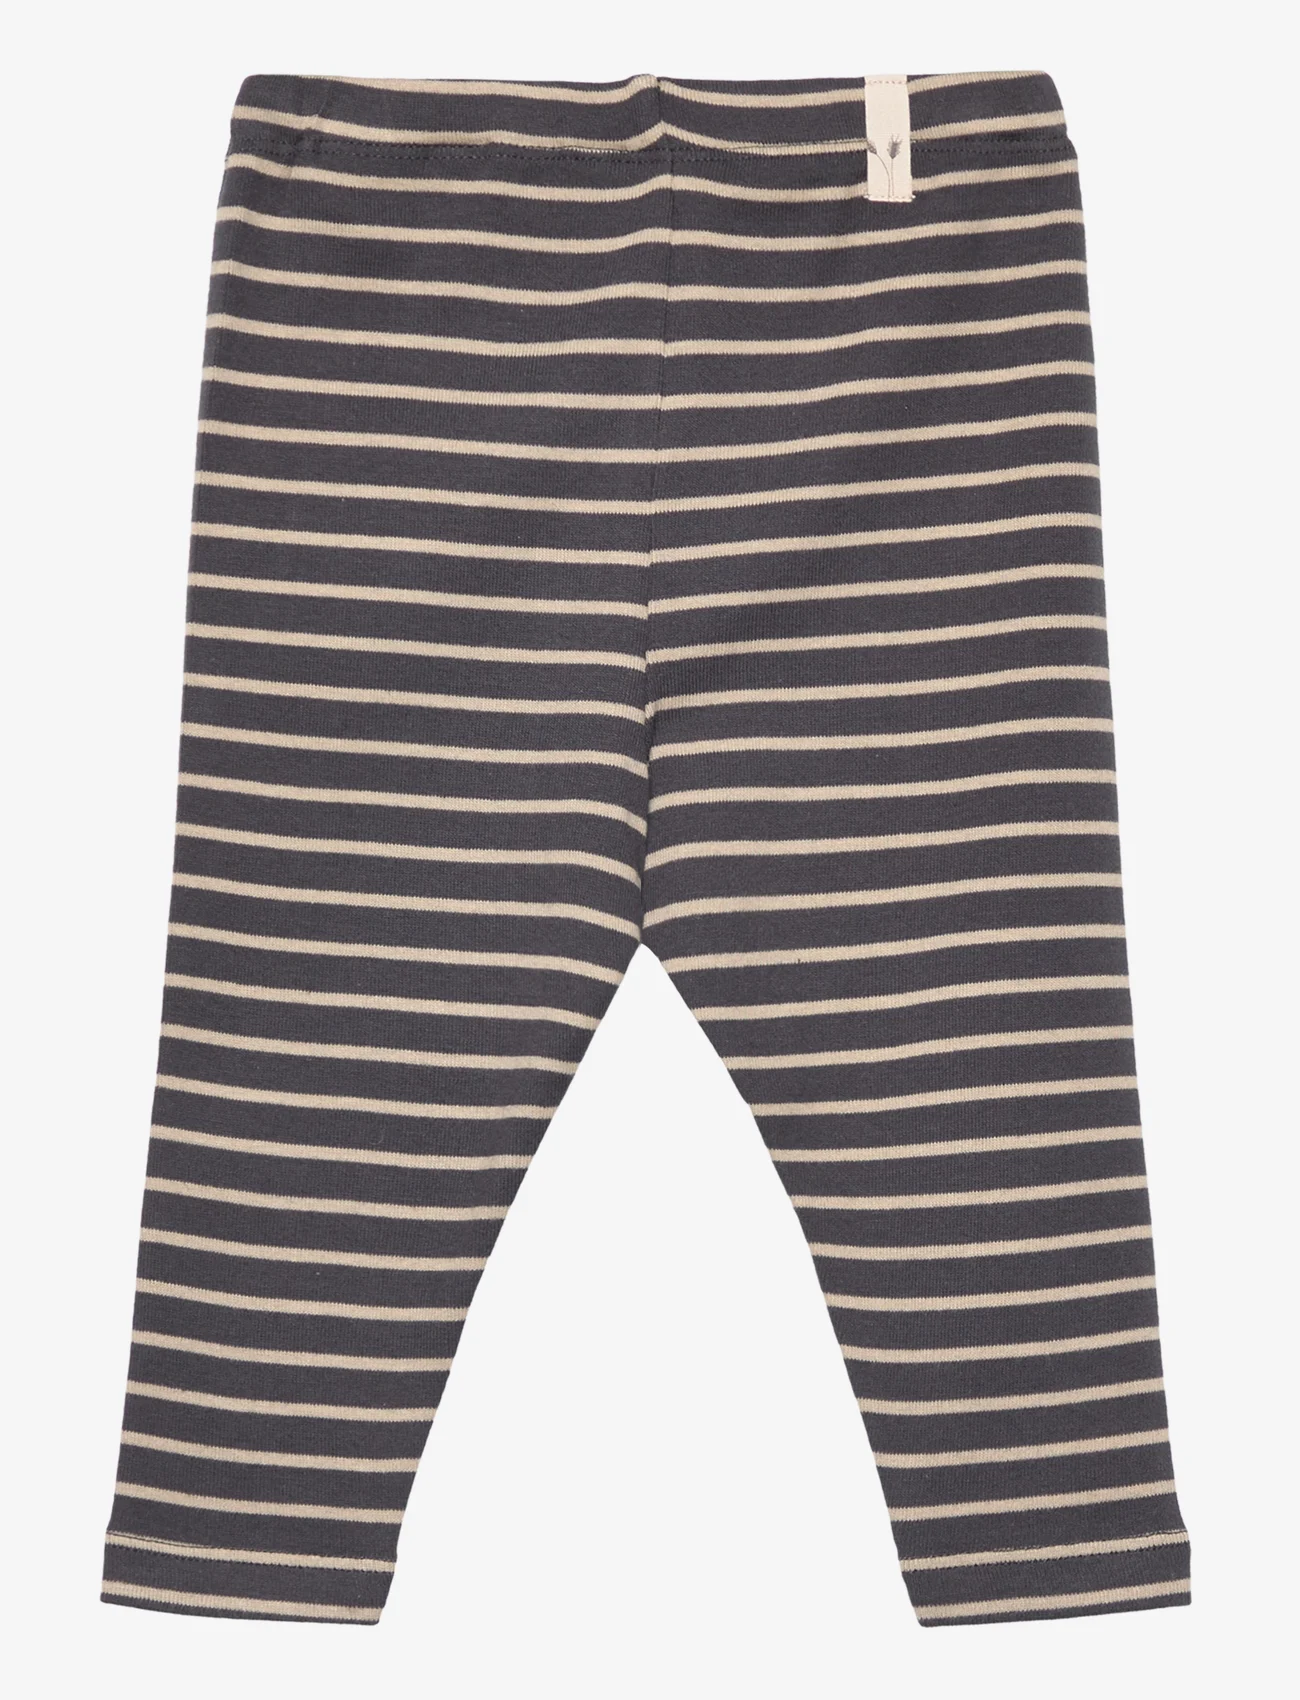 Wheat - Jersey Pants Silas - lowest prices - navy stripe - 1